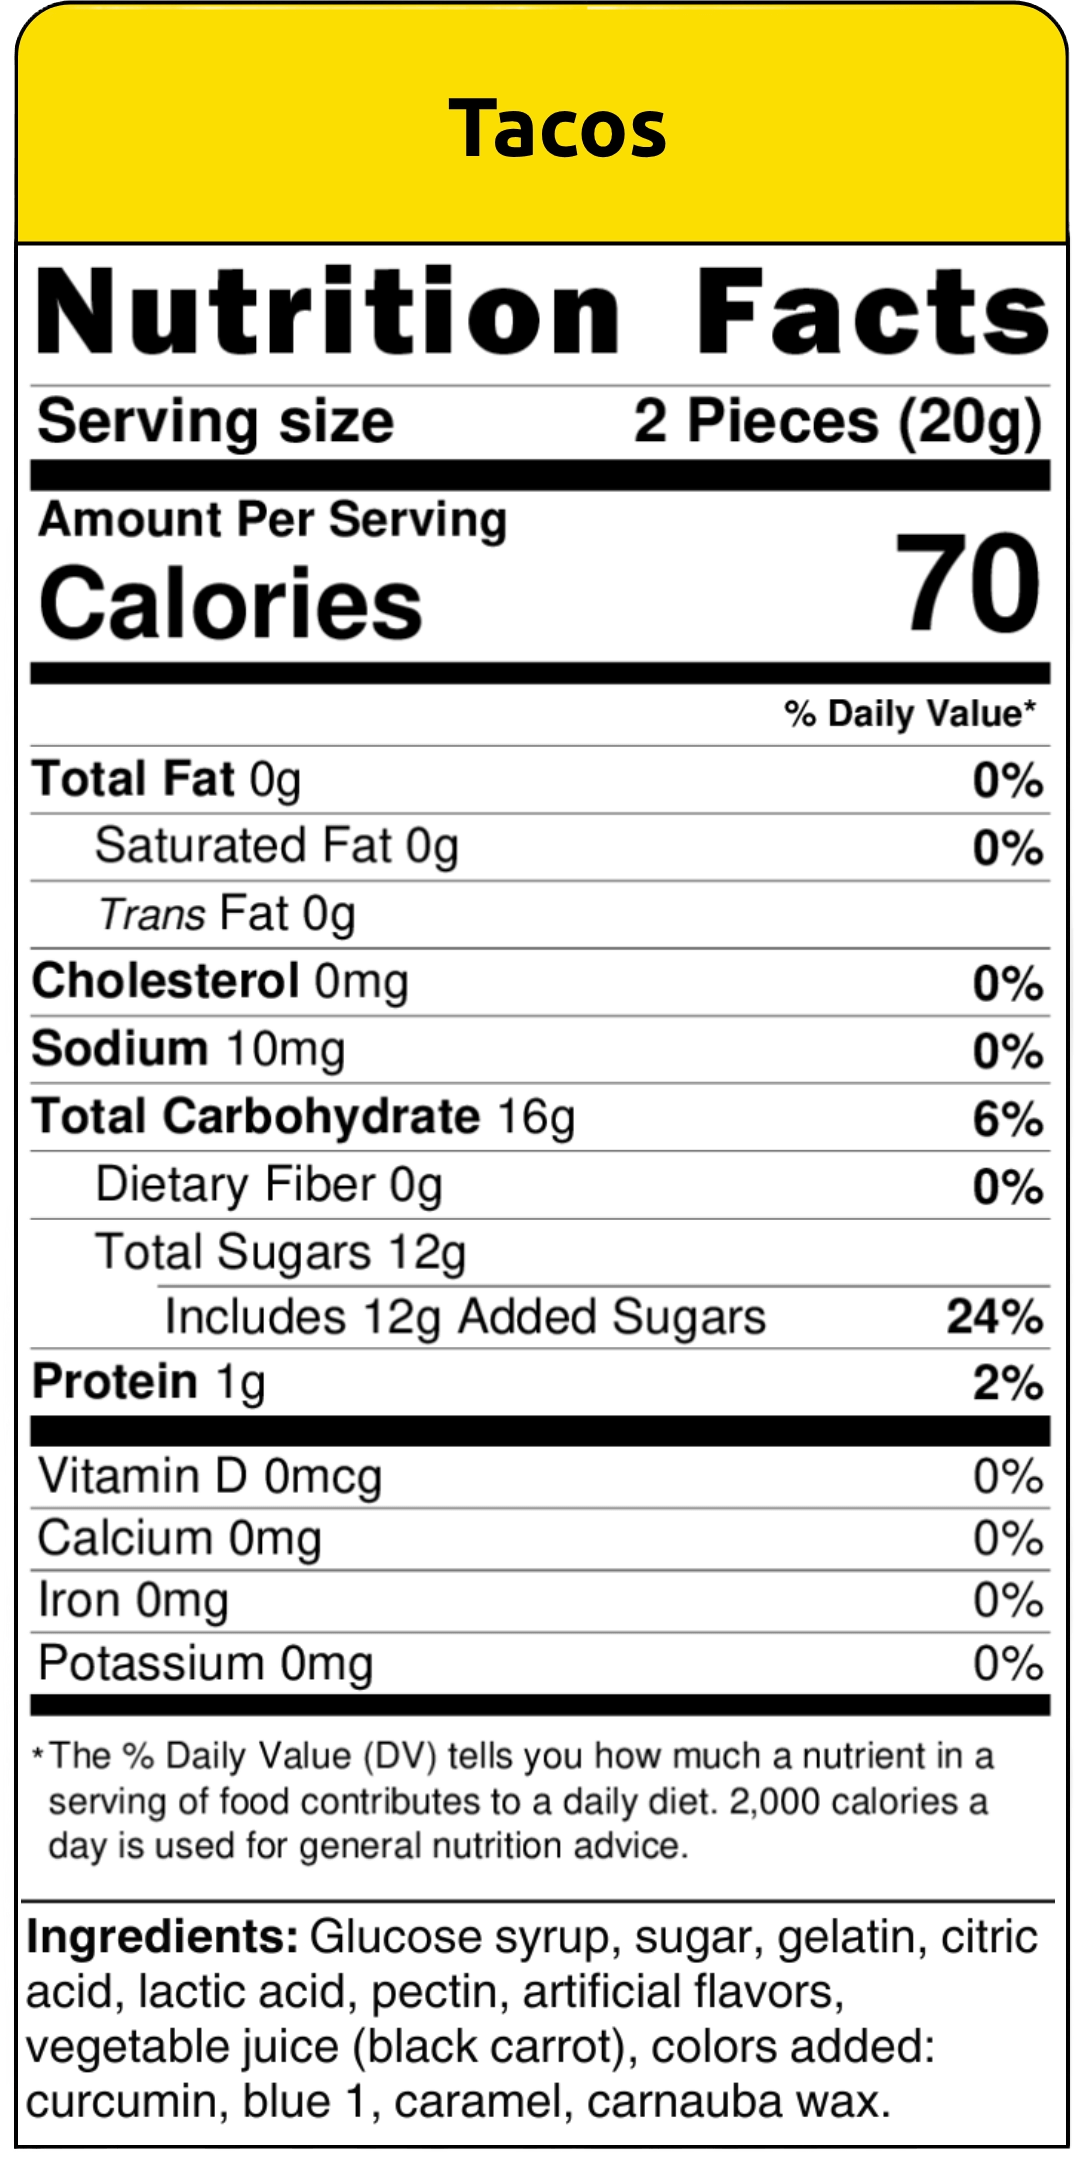 nutritional facts tacos